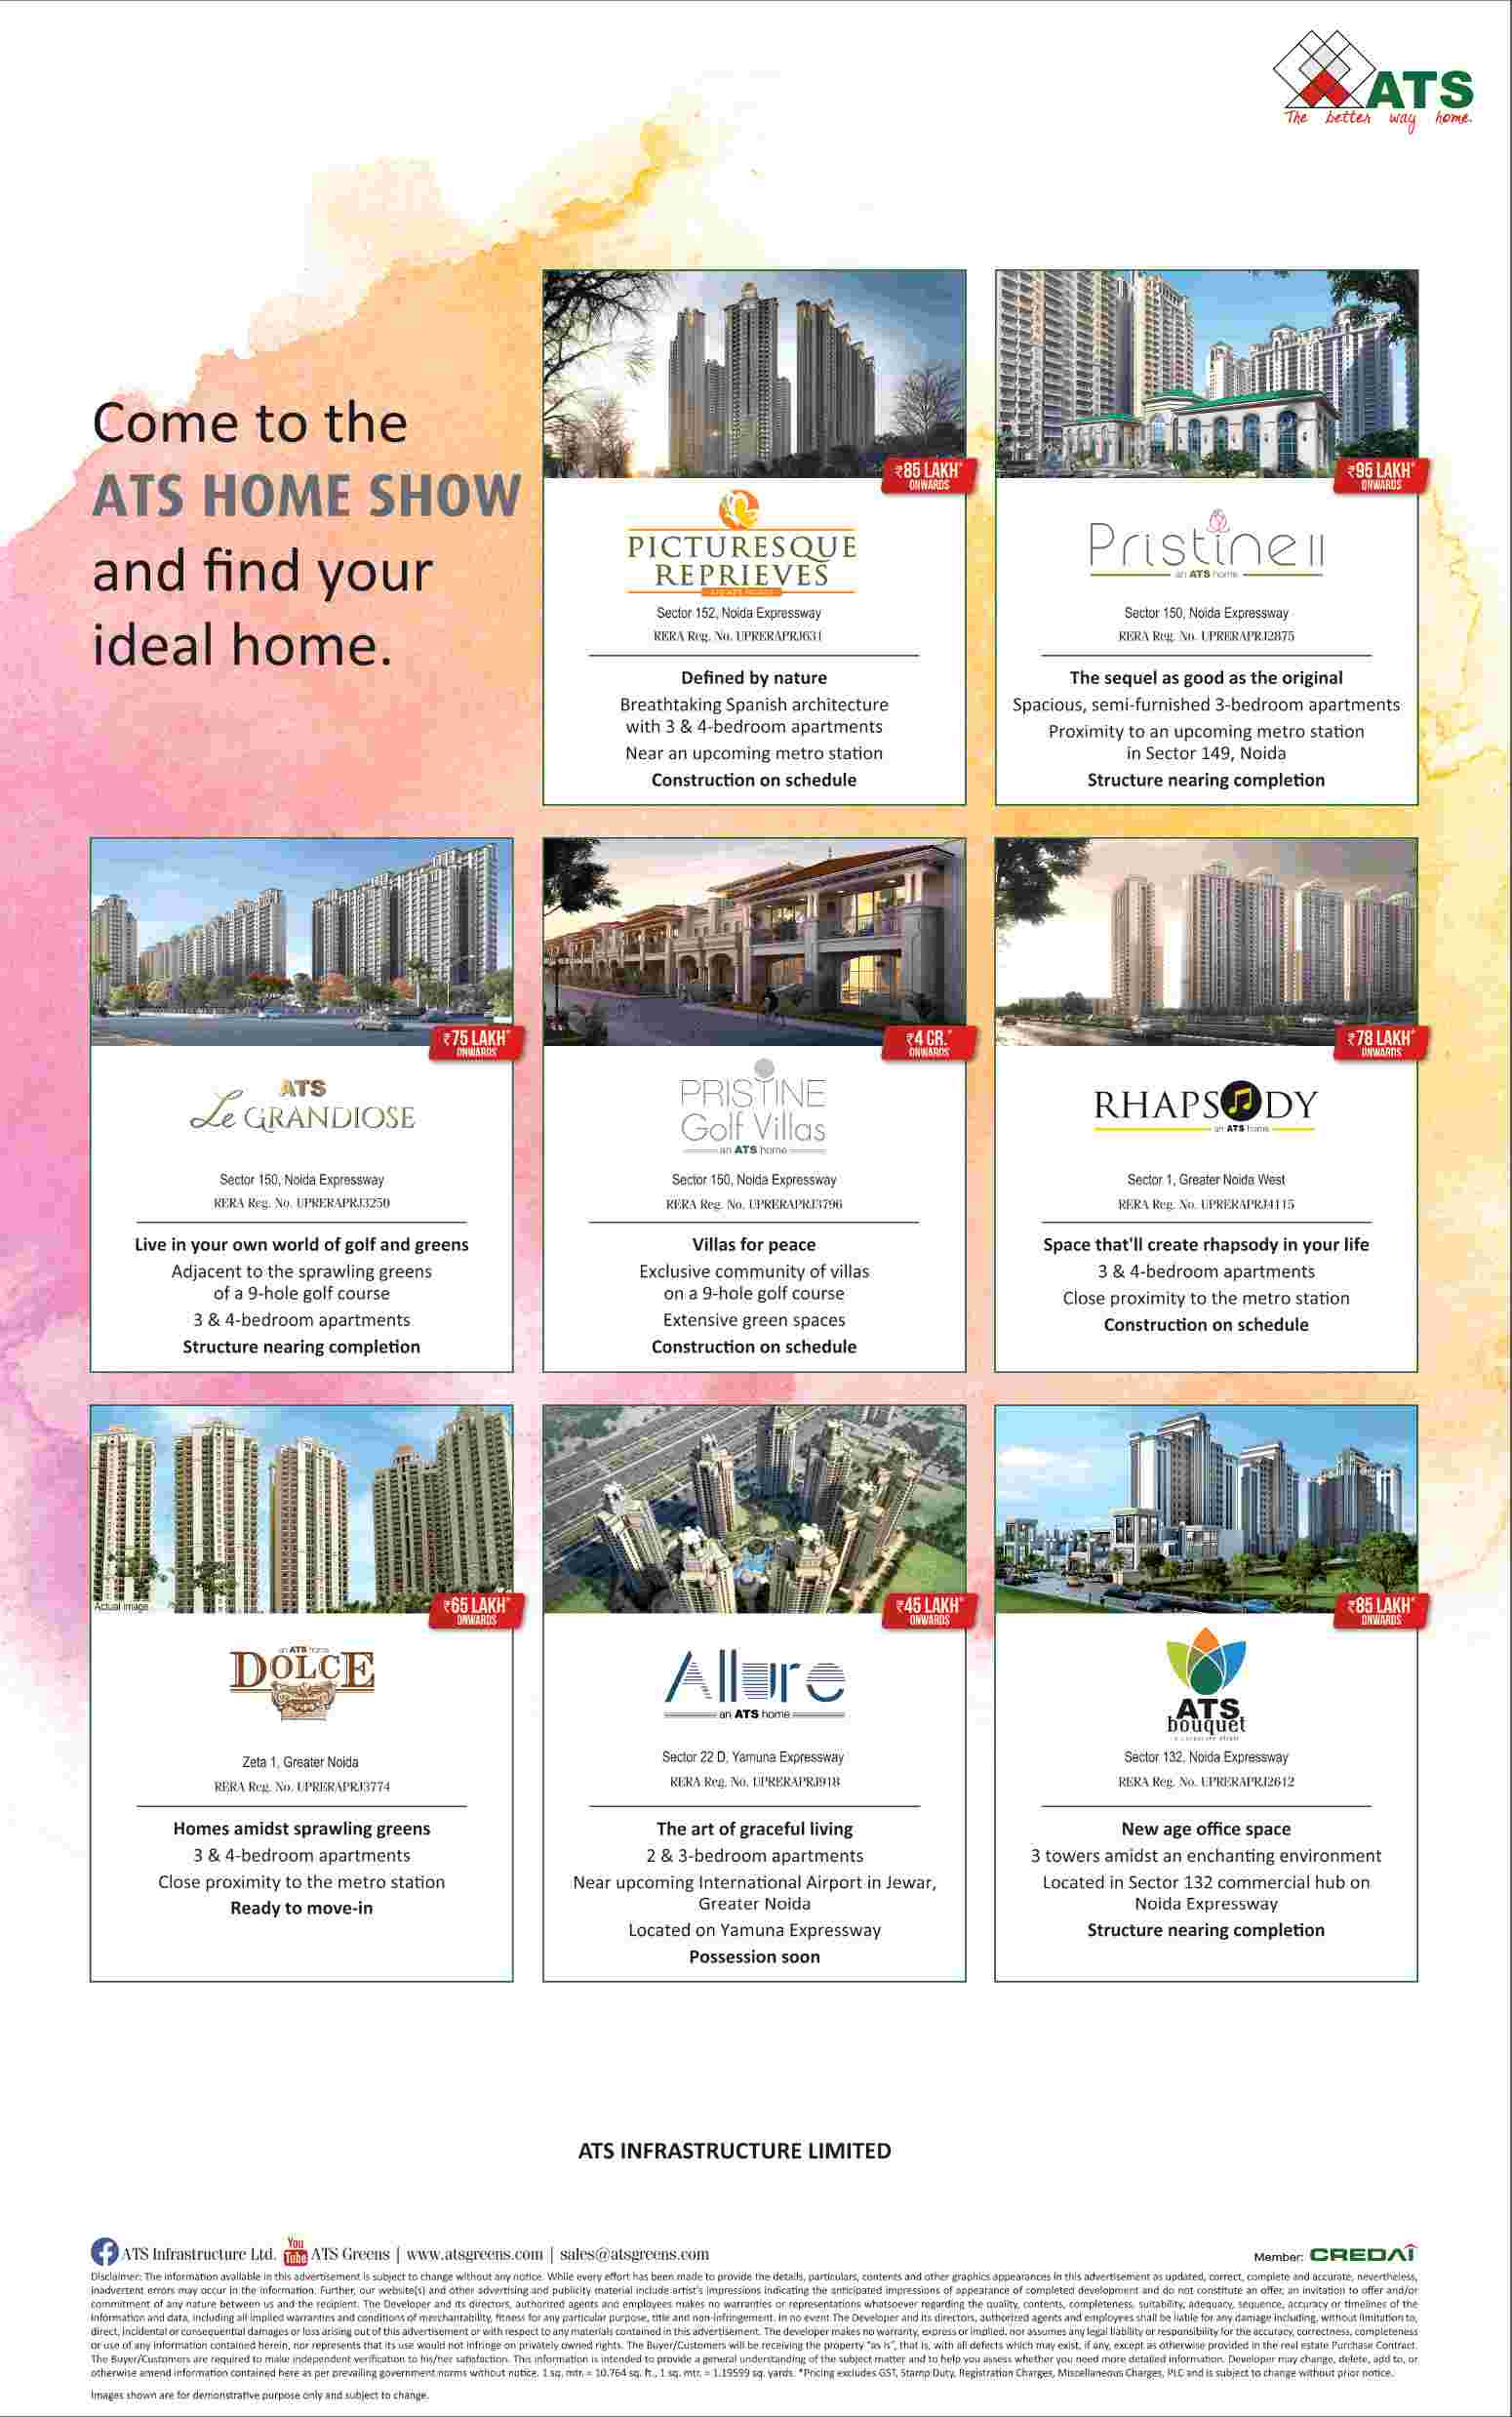 Come to the ATS Home Show and find your ideal home